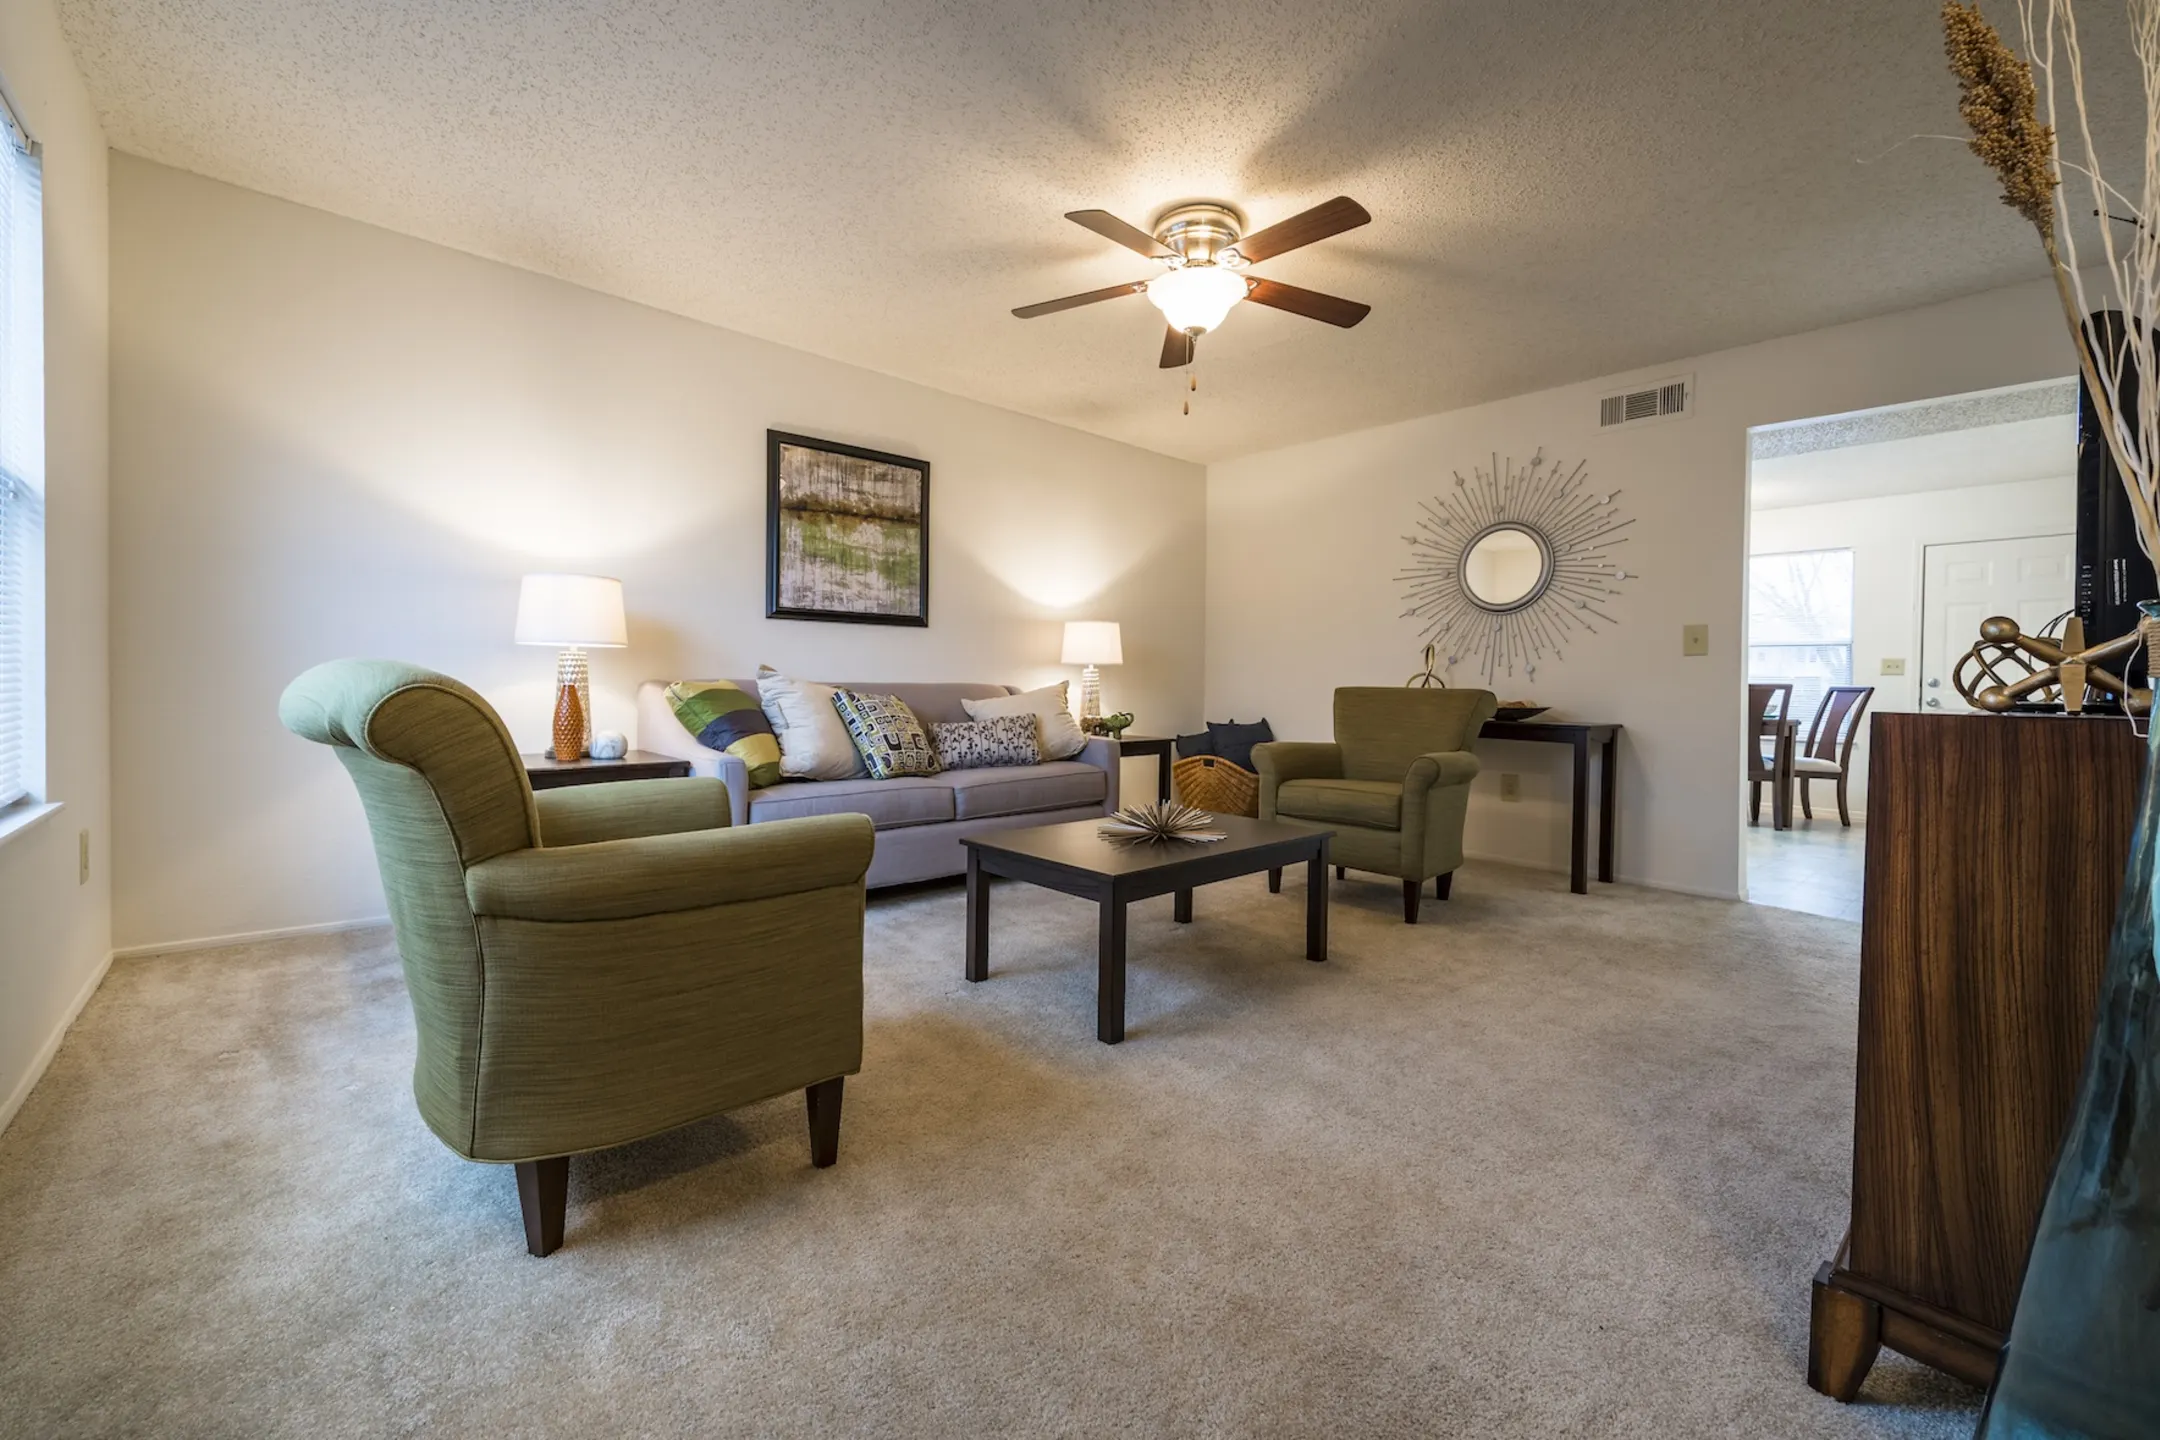 Living Room - MeadowView Townhomes - Goshen, OH